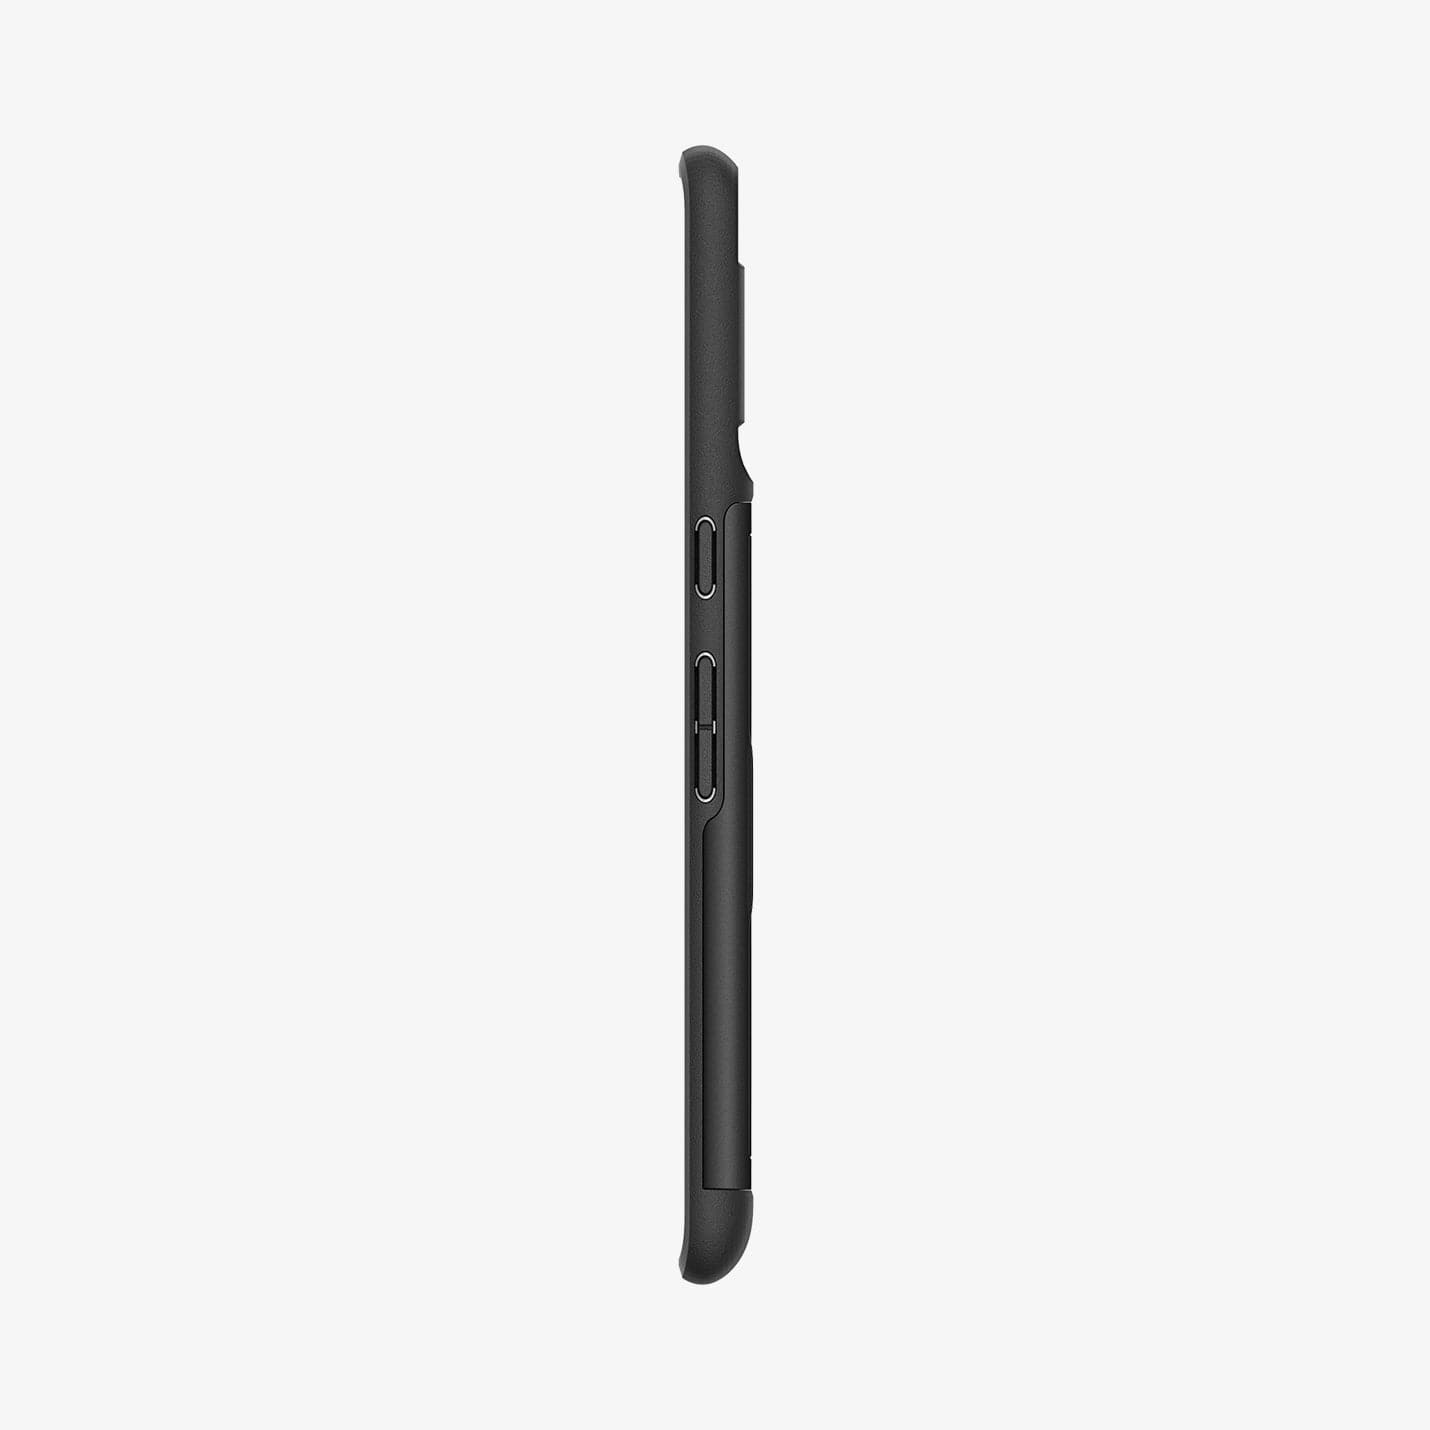 ACS04731 - Pixel 7 Pro Case Slim Armor CS in black showing the side with volume controls